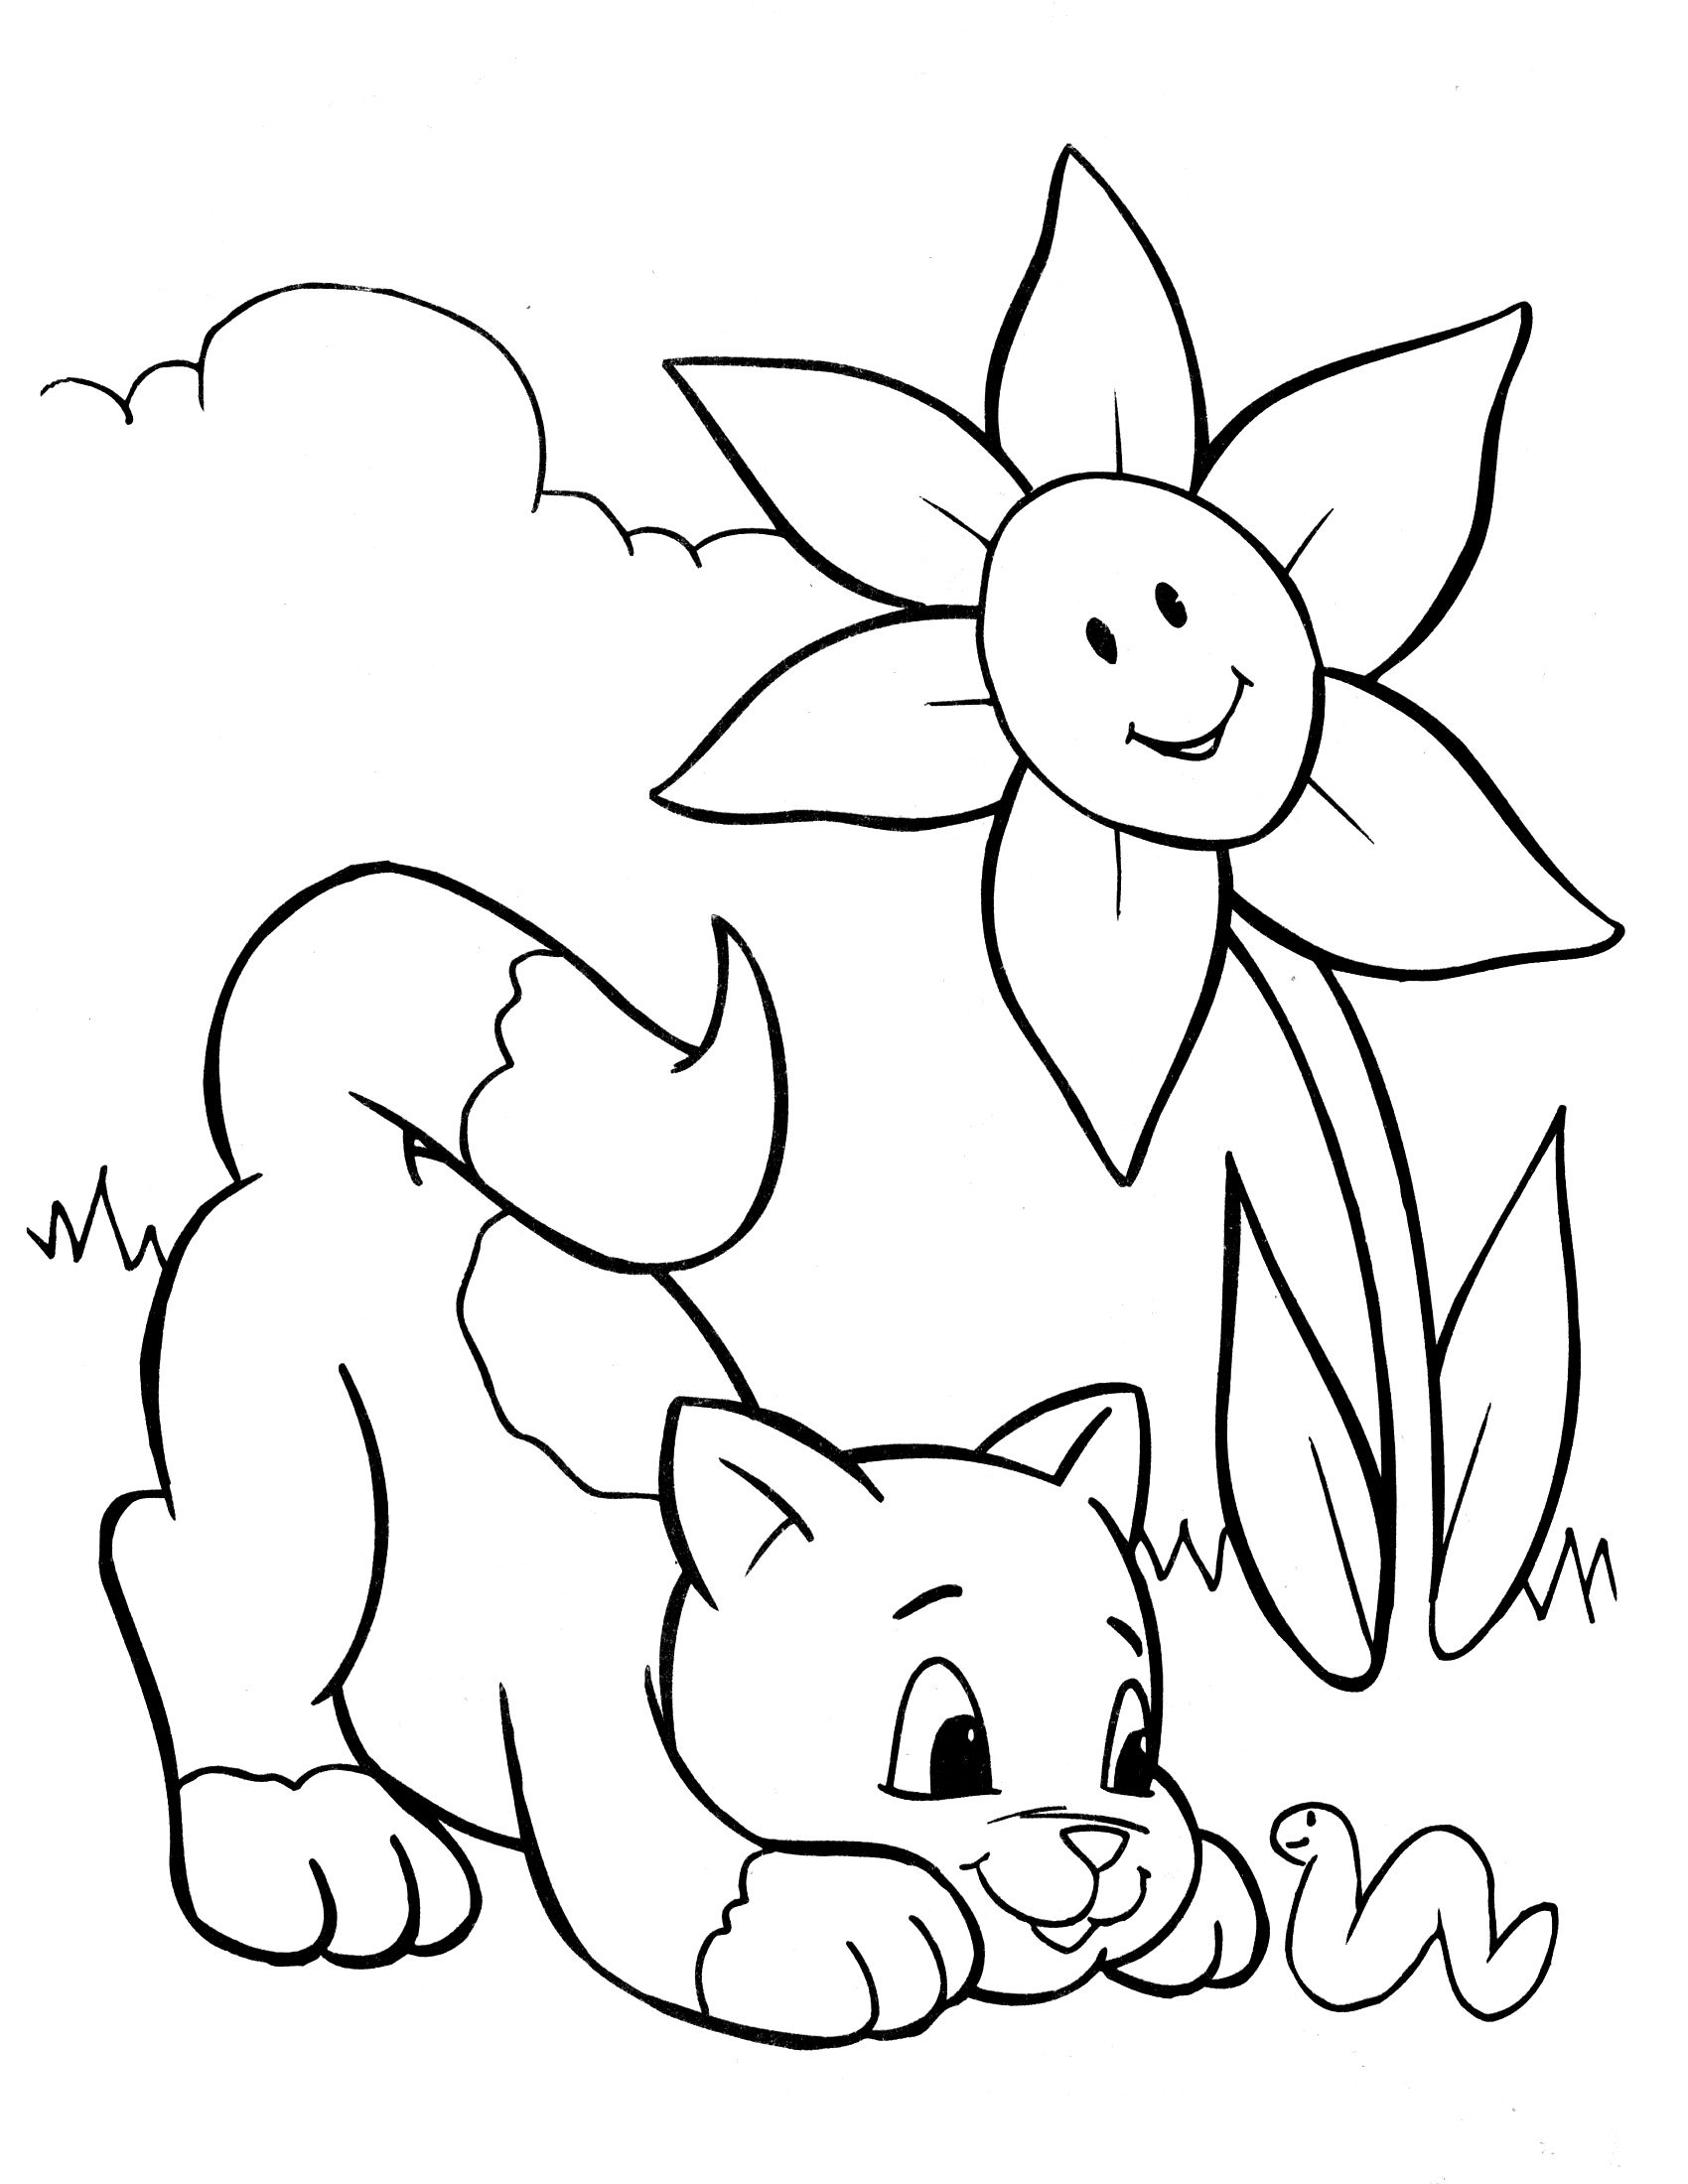 Crayola 12 Coloring pages winter, Summer coloring pages, Spring